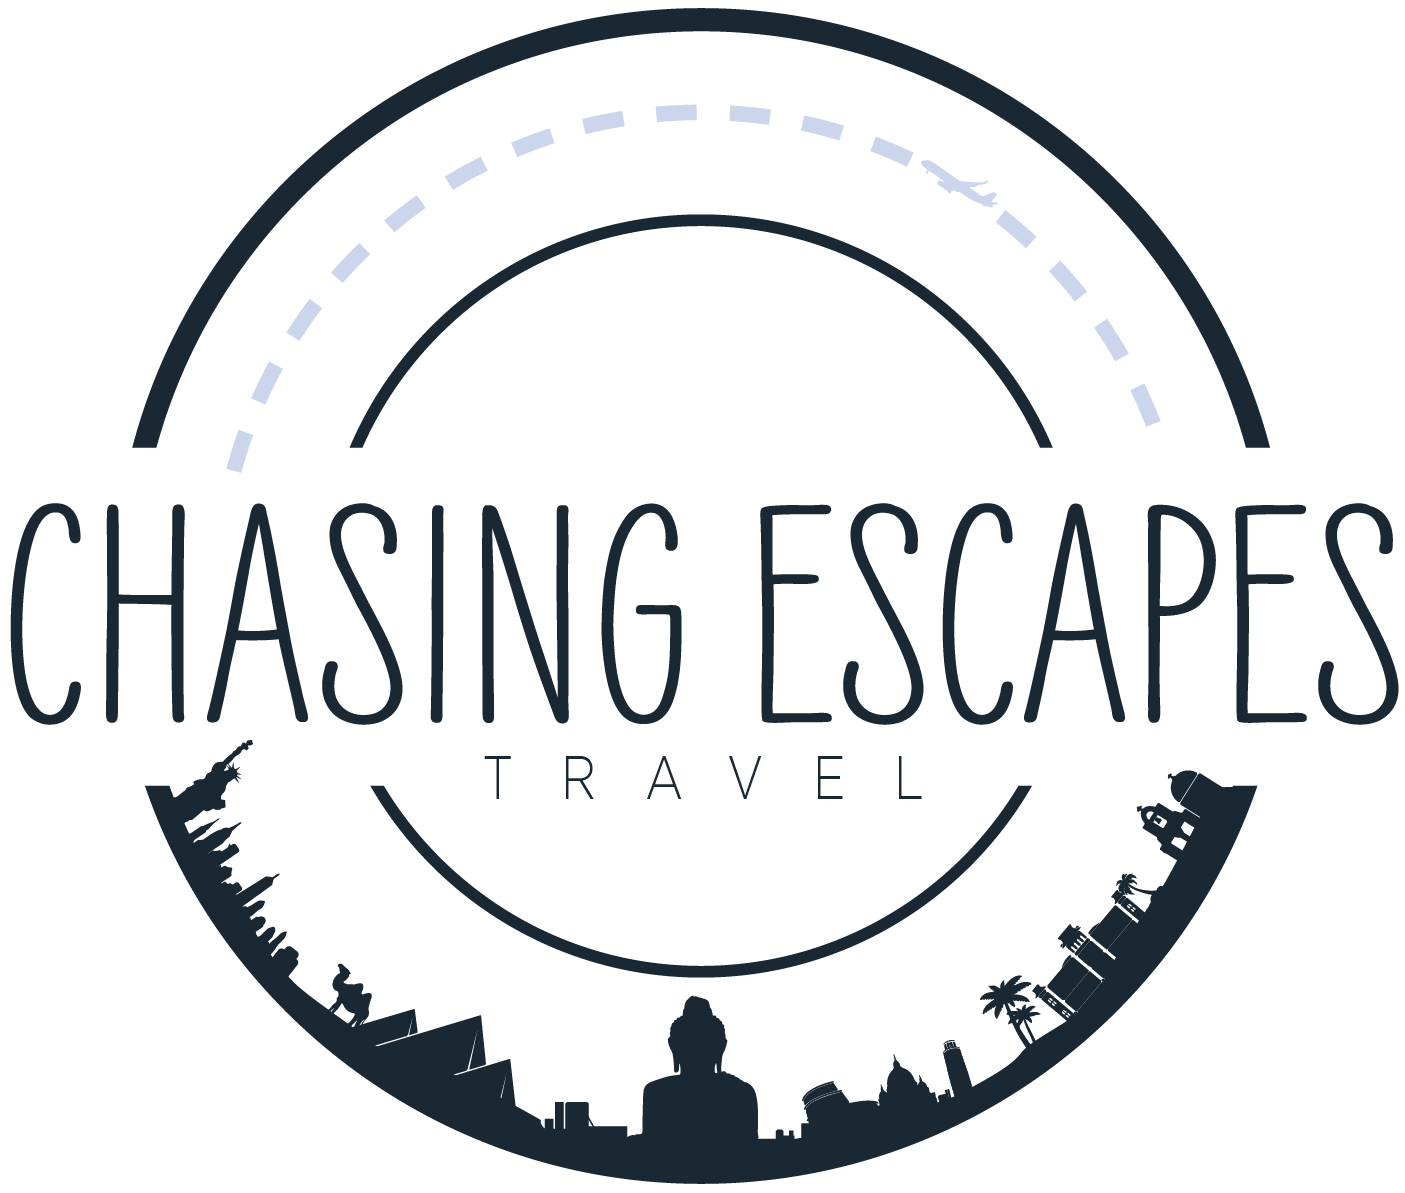 Chasing Escapes Travel